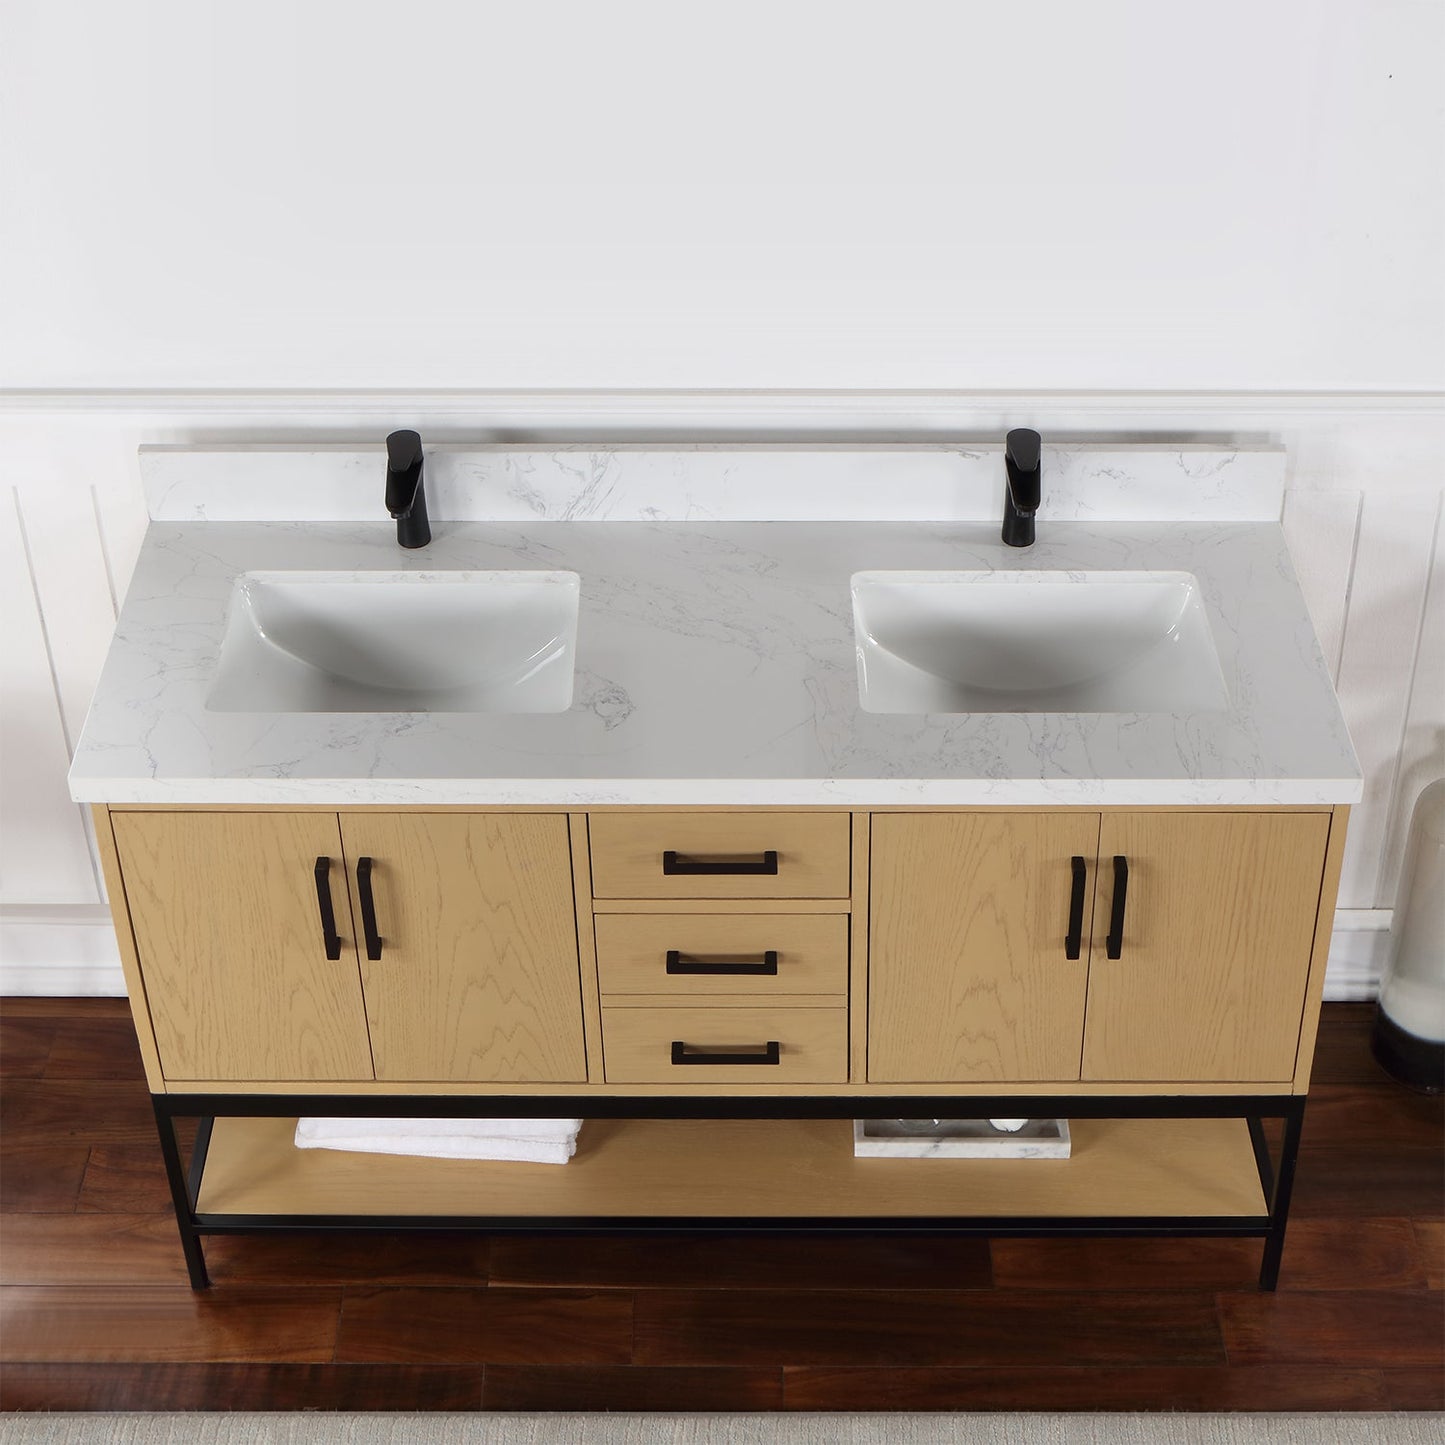 Wildy 60" Double Bathroom Vanity Set in Washed Oak with Grain White Composite Stone Countertop without Mirror